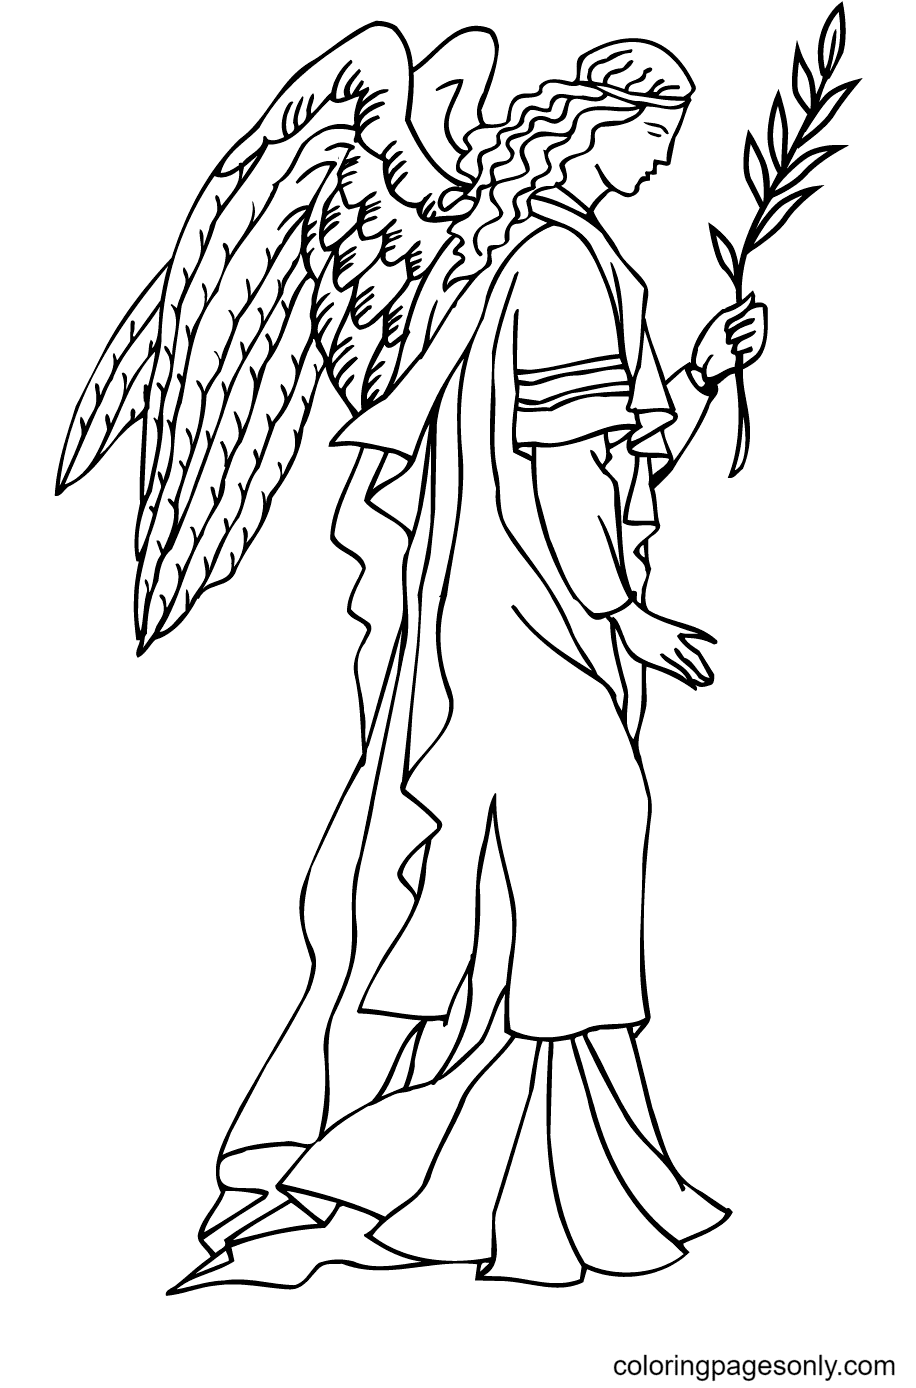 Angel Carrying a Palm Branch from Angel